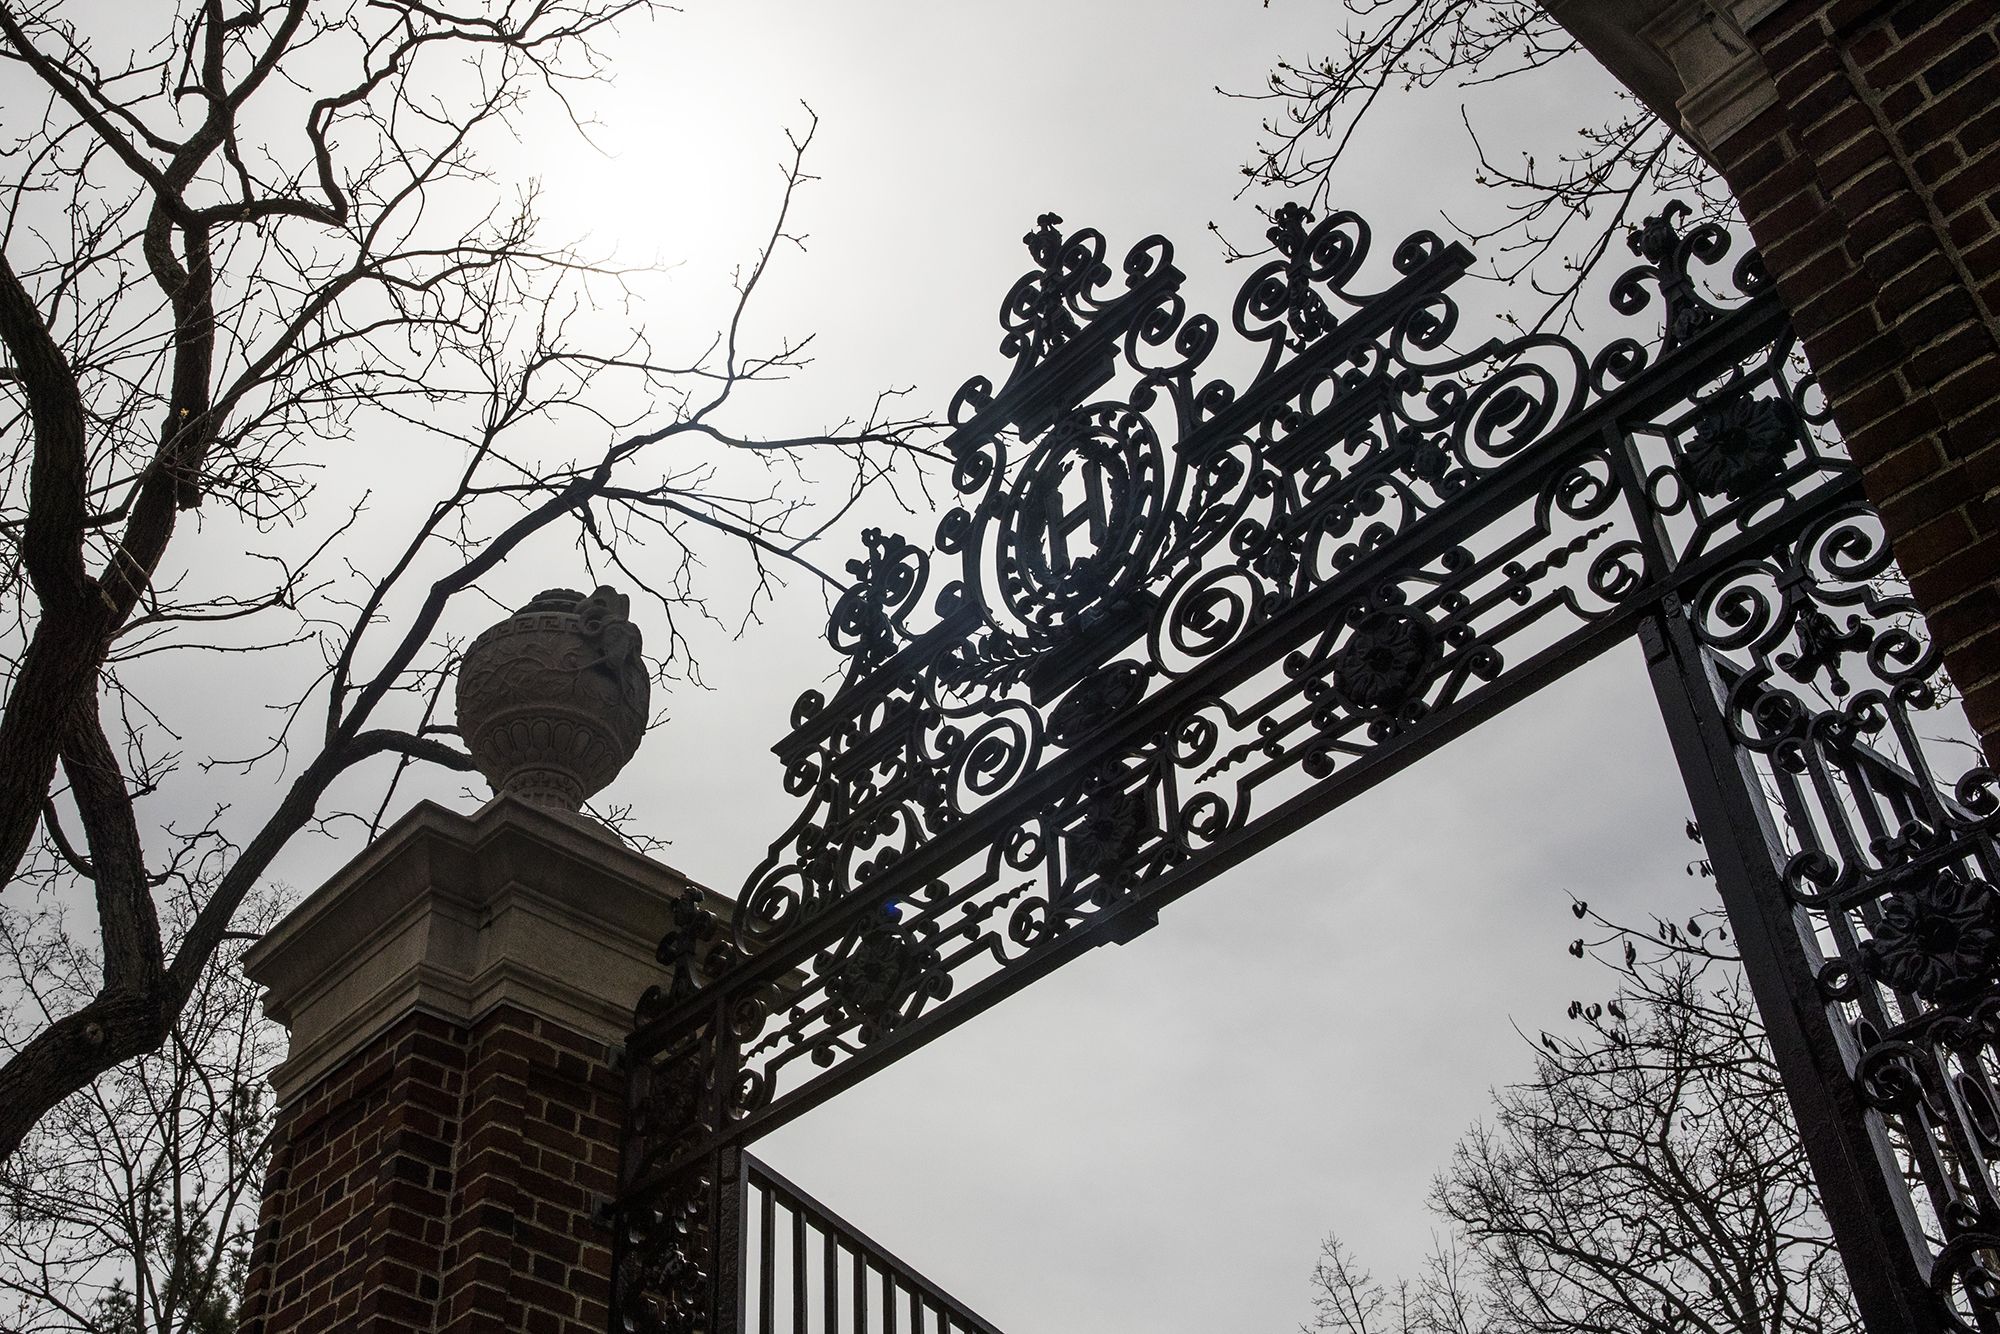 The Anguished Fallout from a Pro-Palestinian Letter at Harvard